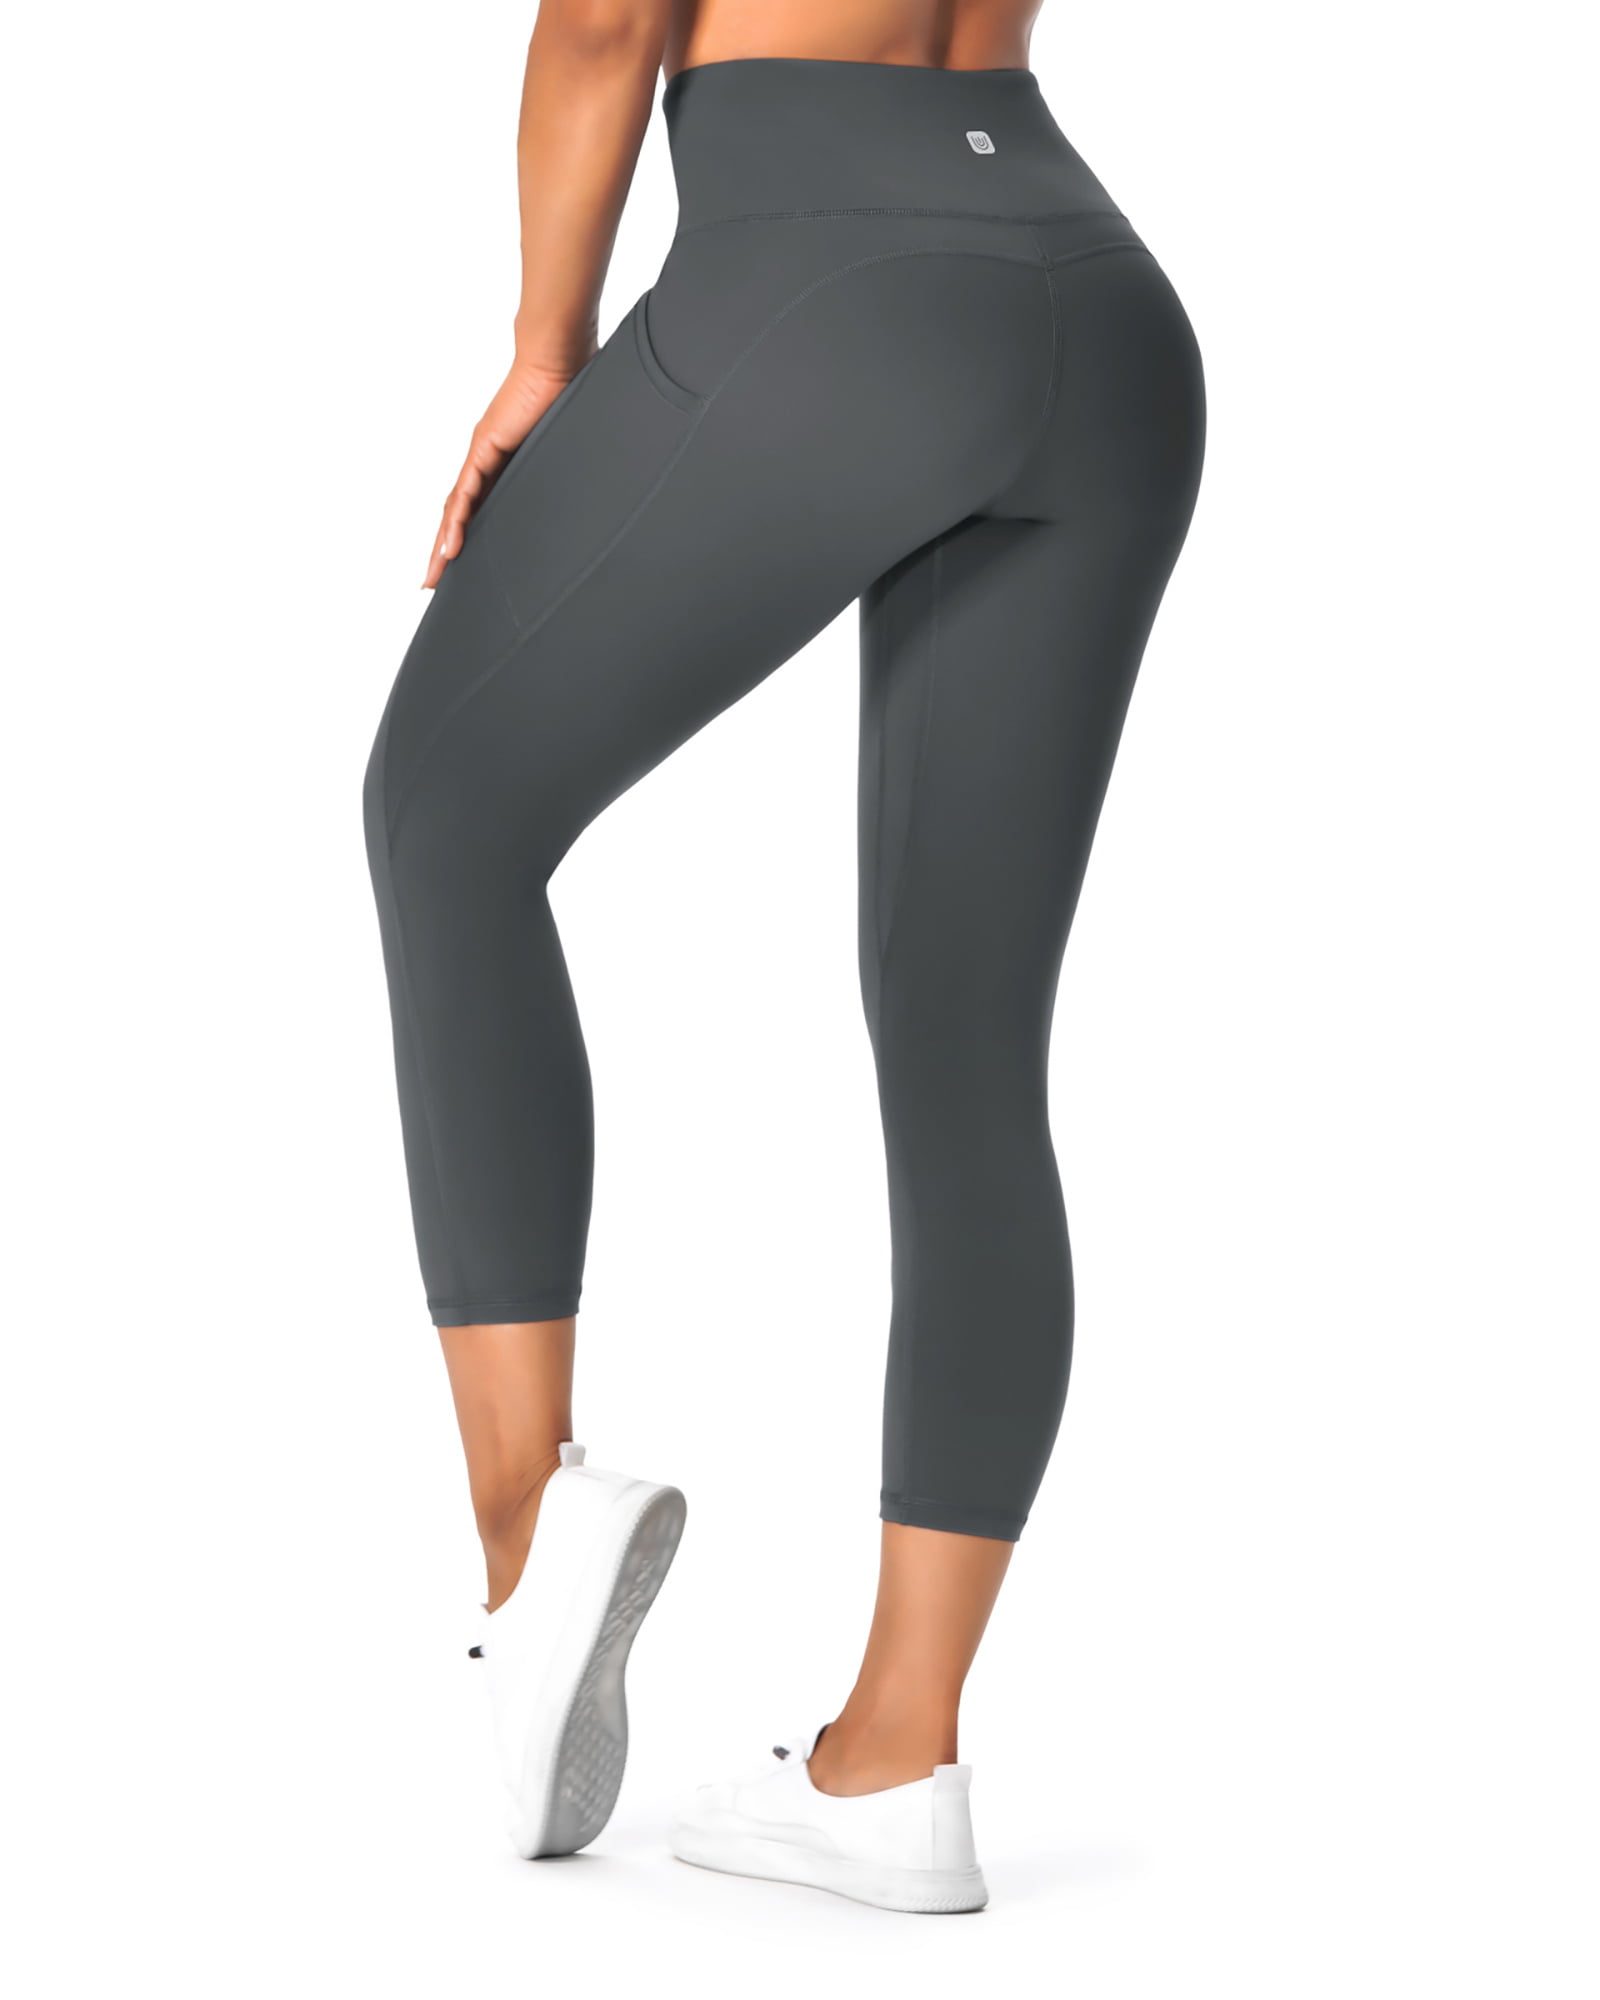 UUE 21 Inseam Gray Workout Leggings for Women,Yoga Capris with